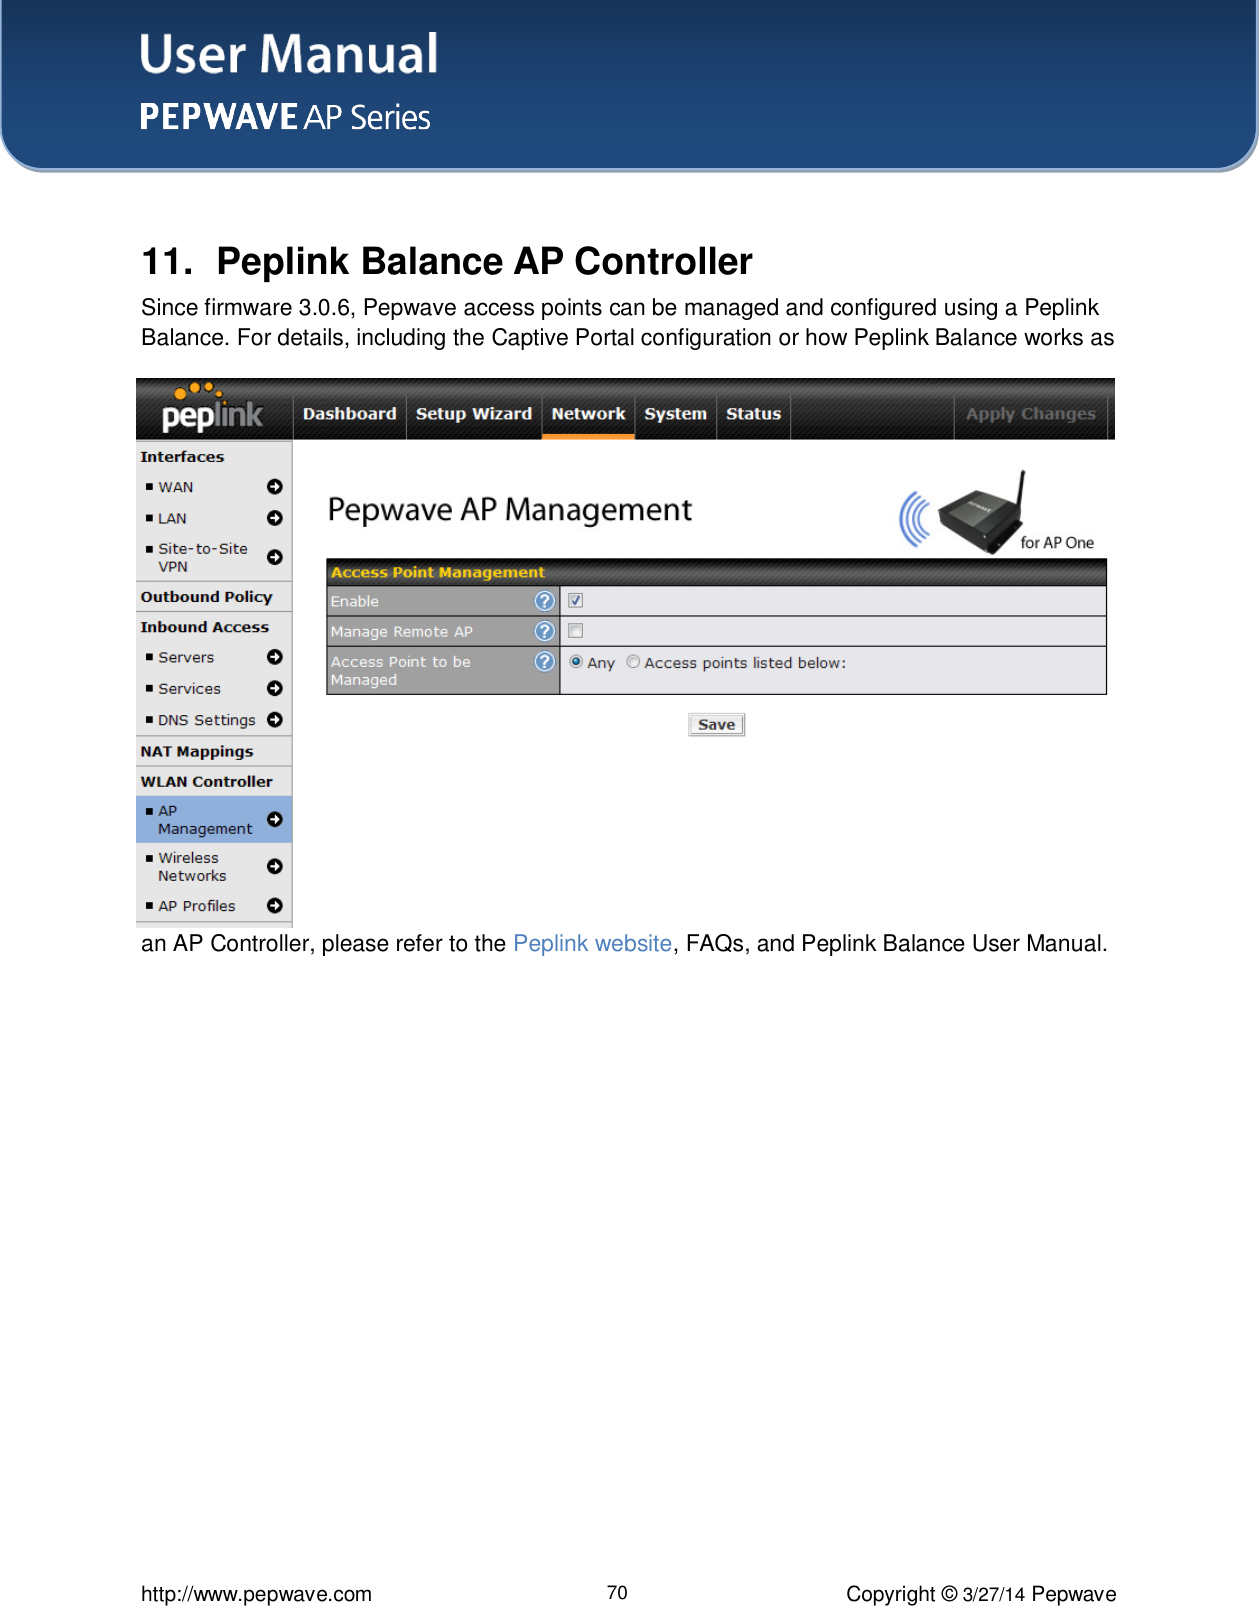 User Manual    http://www.pepwave.com 70 Copyright ©  3/27/14 Pepwave   11.  Peplink Balance AP Controller Since firmware 3.0.6, Pepwave access points can be managed and configured using a Peplink Balance. For details, including the Captive Portal configuration or how Peplink Balance works as an AP Controller, please refer to the Peplink website, FAQs, and Peplink Balance User Manual.  